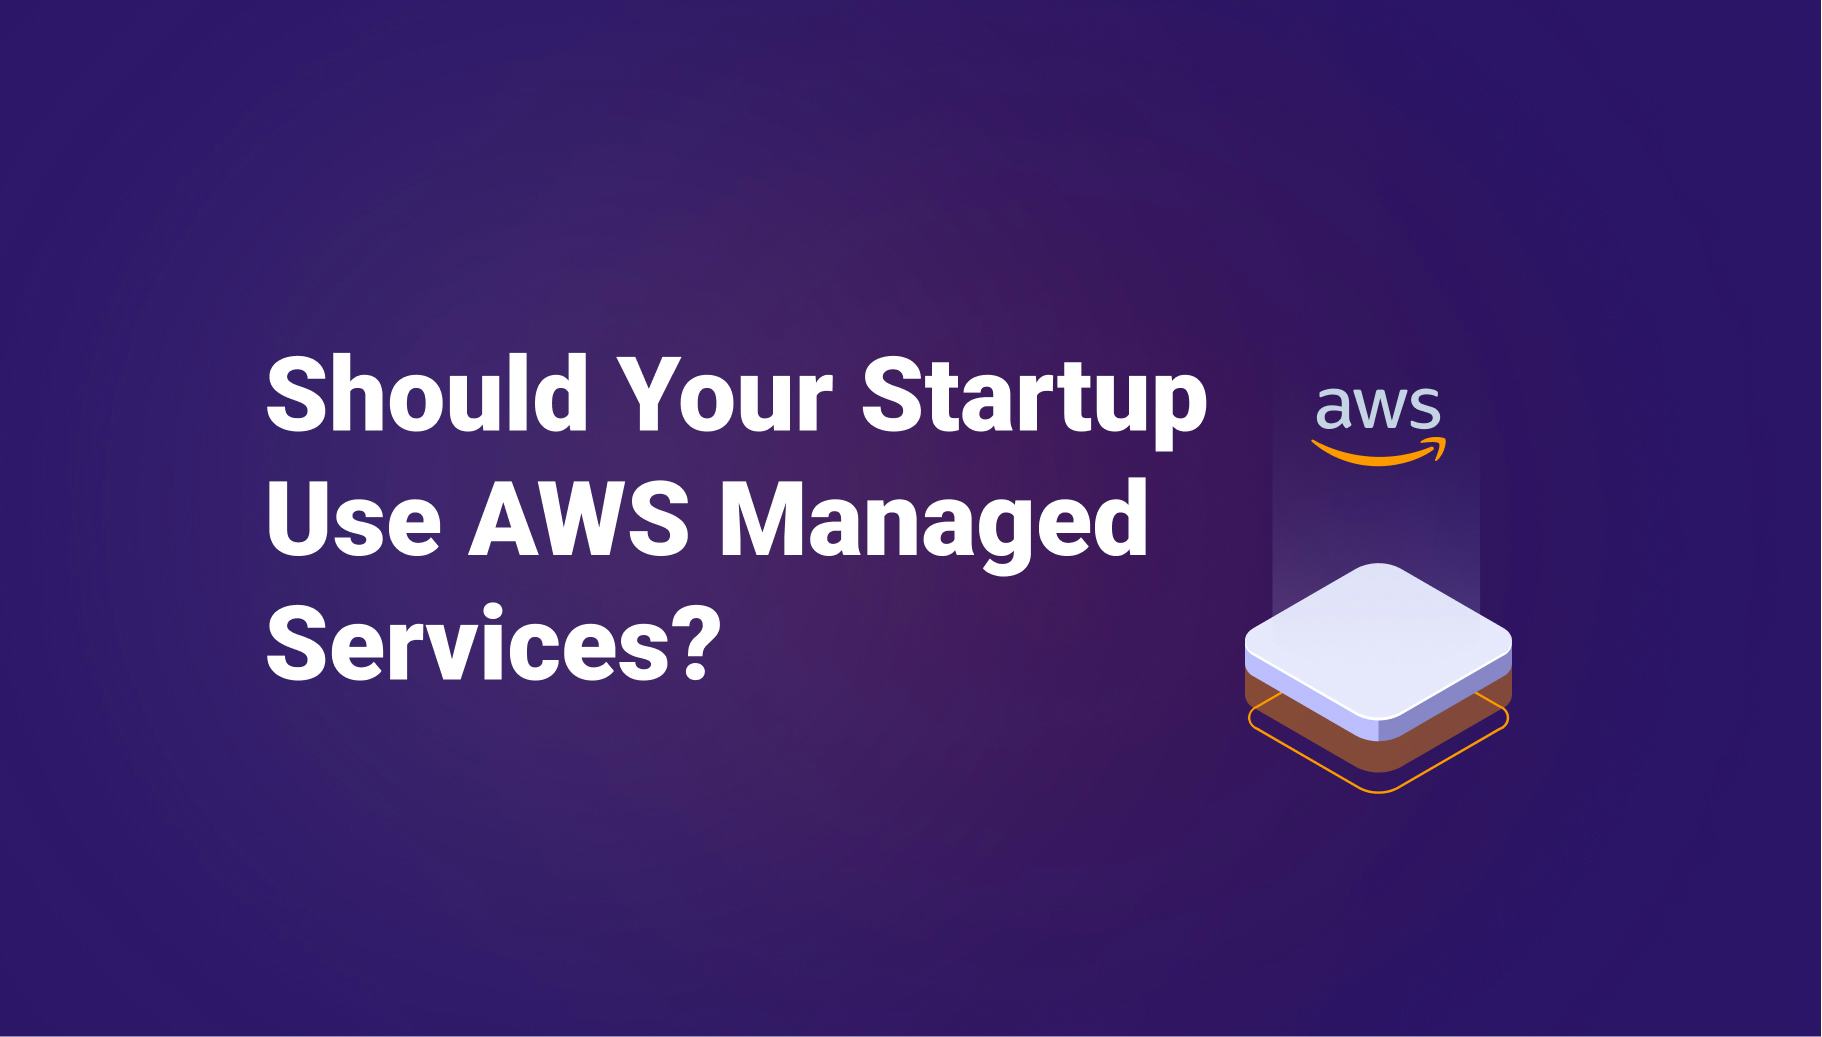 Should Your Startup Use AWS Managed Services? - Qovery